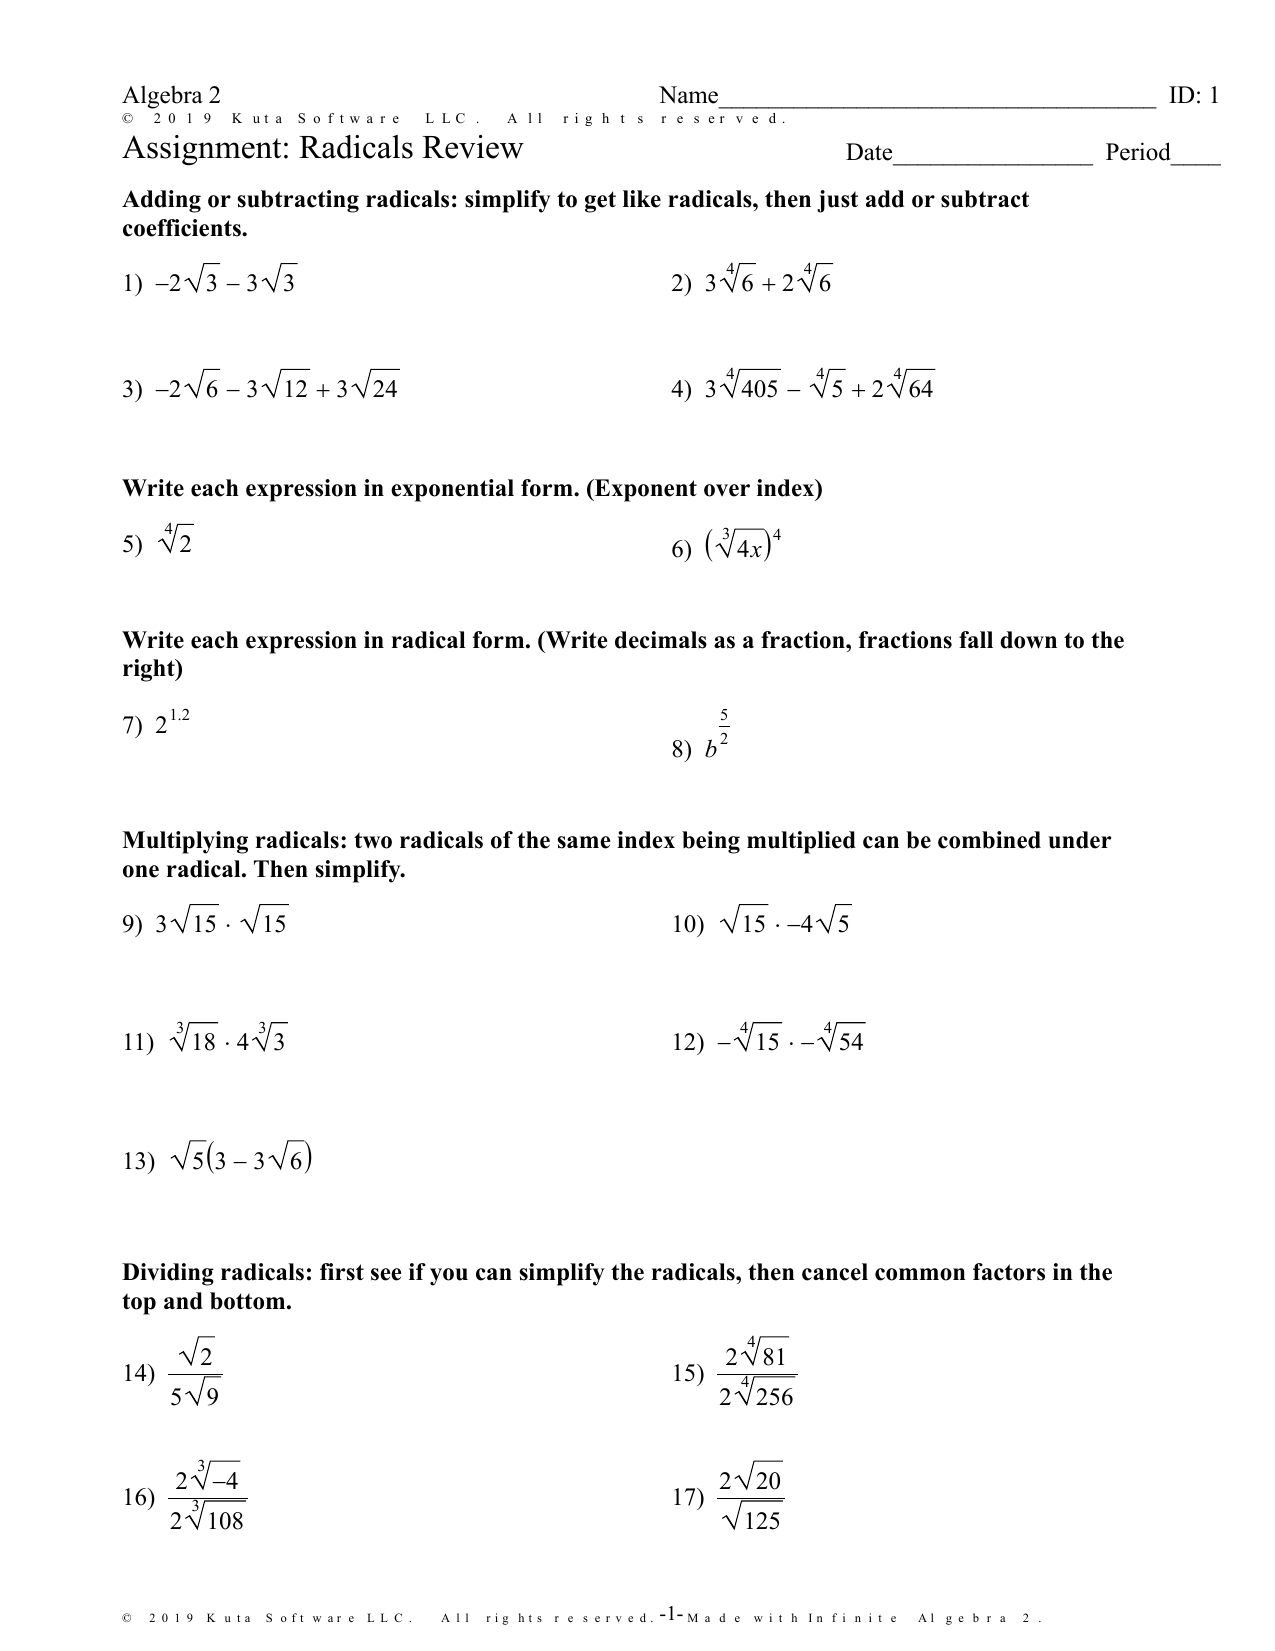 Radicals and Rational Exponents Review Inside Simplifying Radicals Worksheet Algebra 2